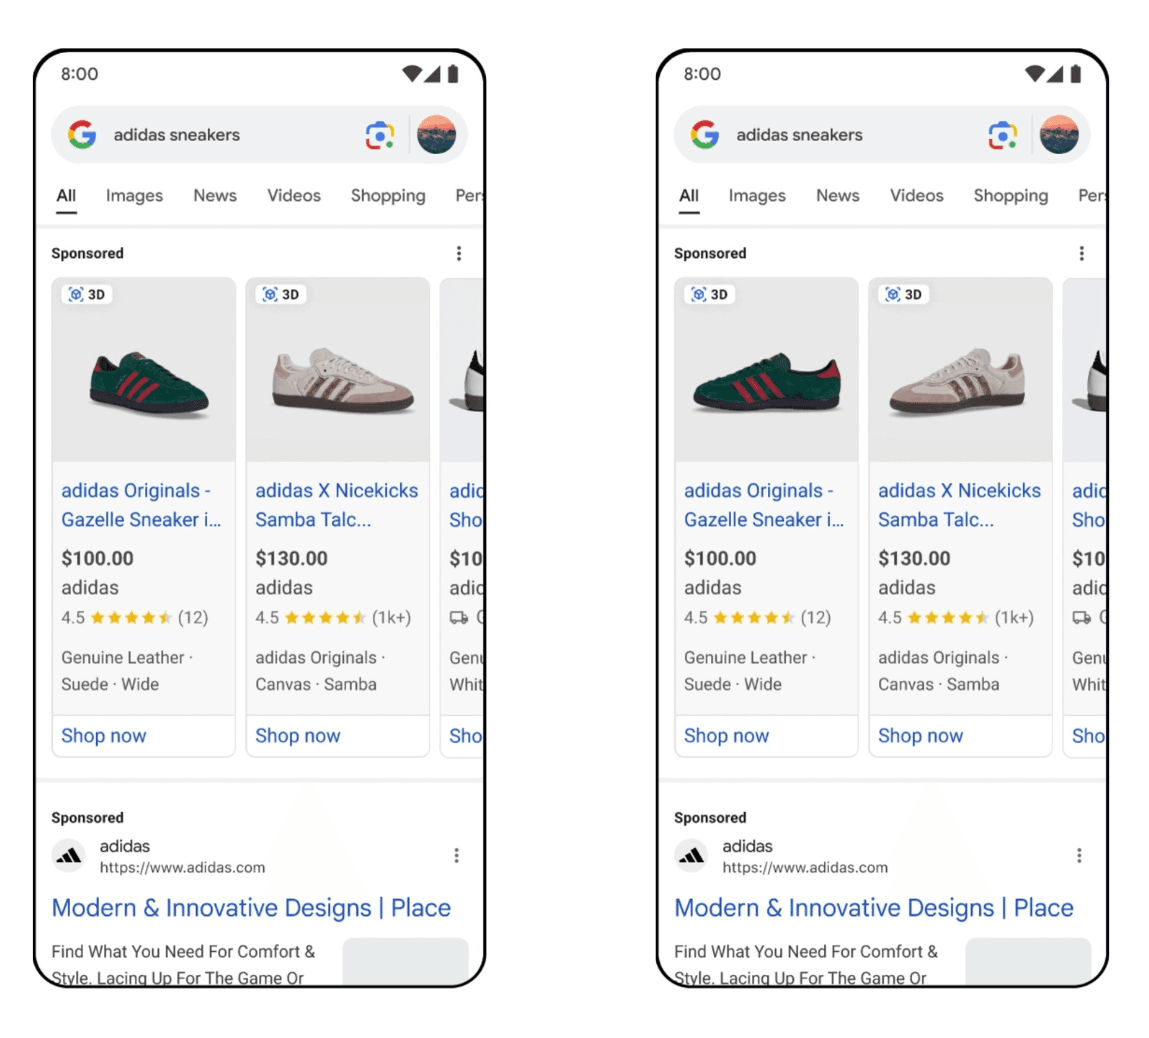 15.Google-360-3d-product-spin-shopping-ads.png